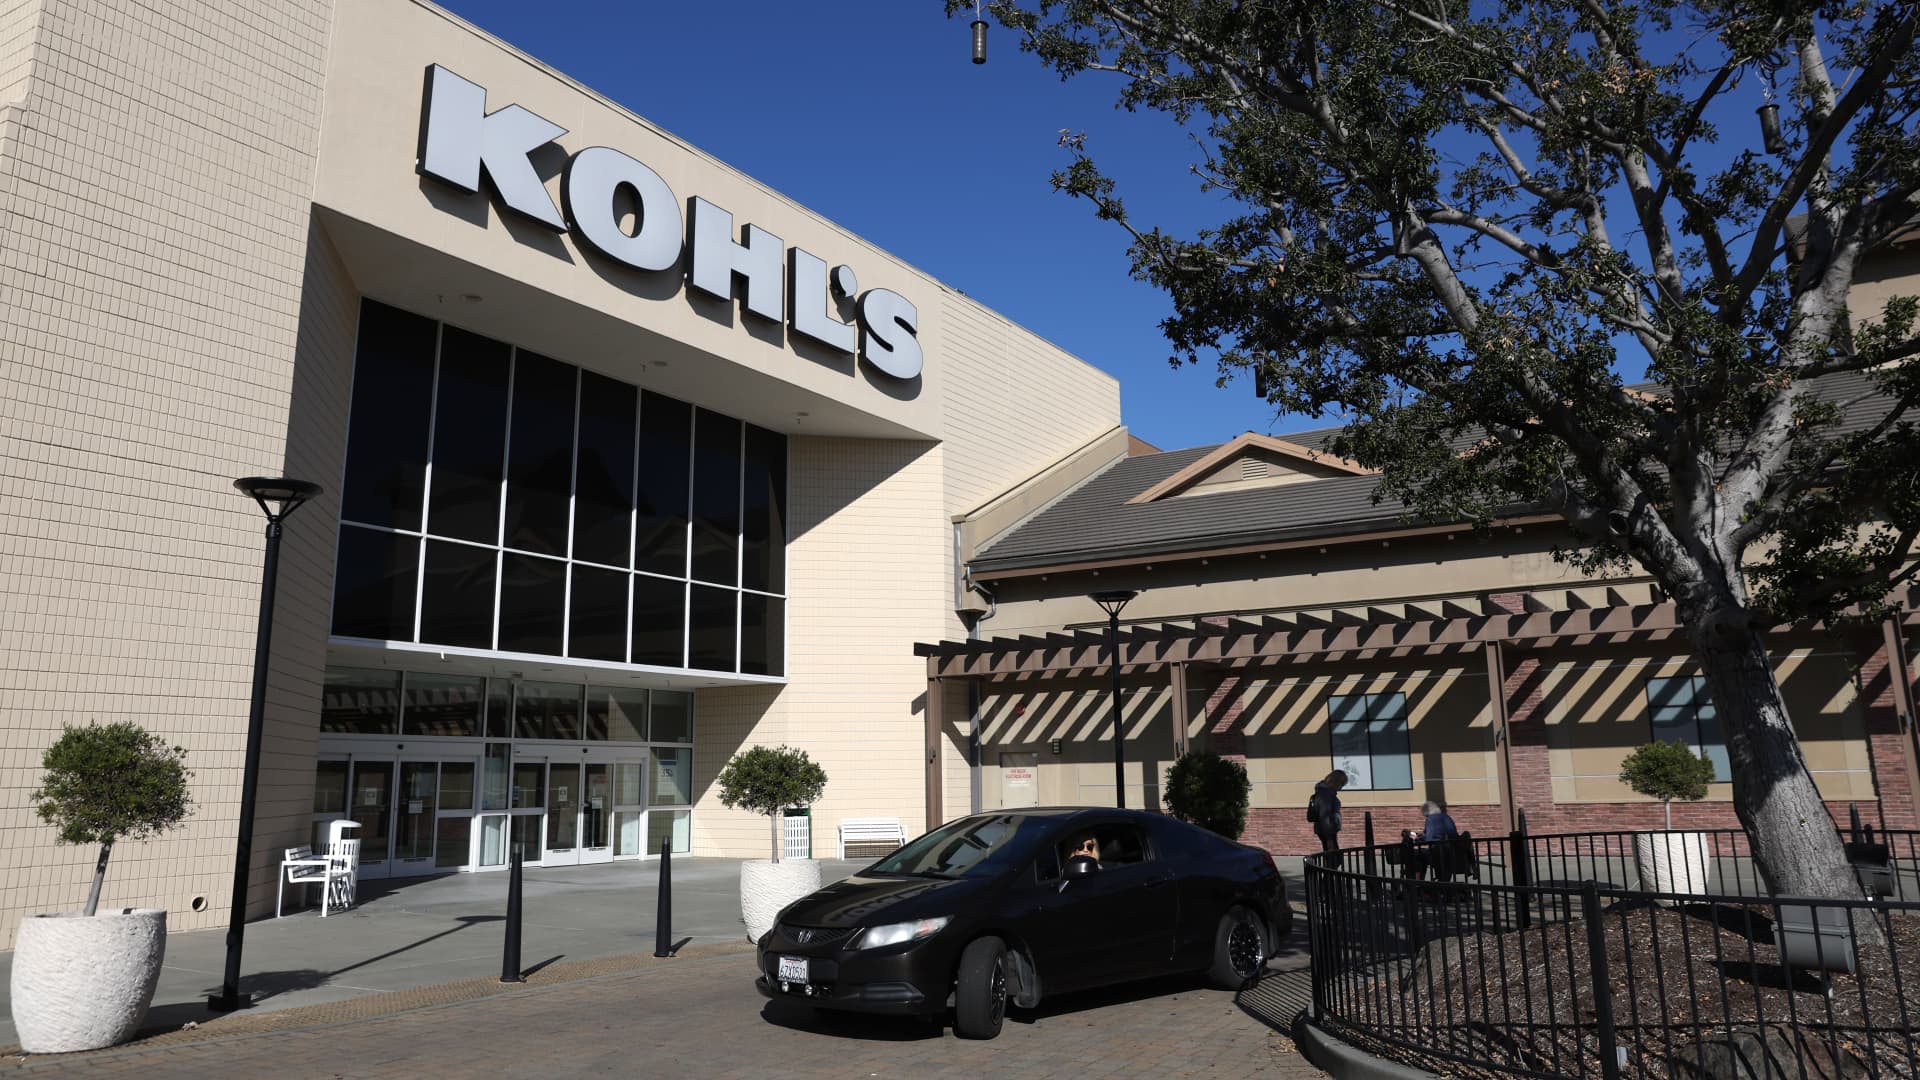 Kohl’s confirms it has received multiple preliminary buyout offers